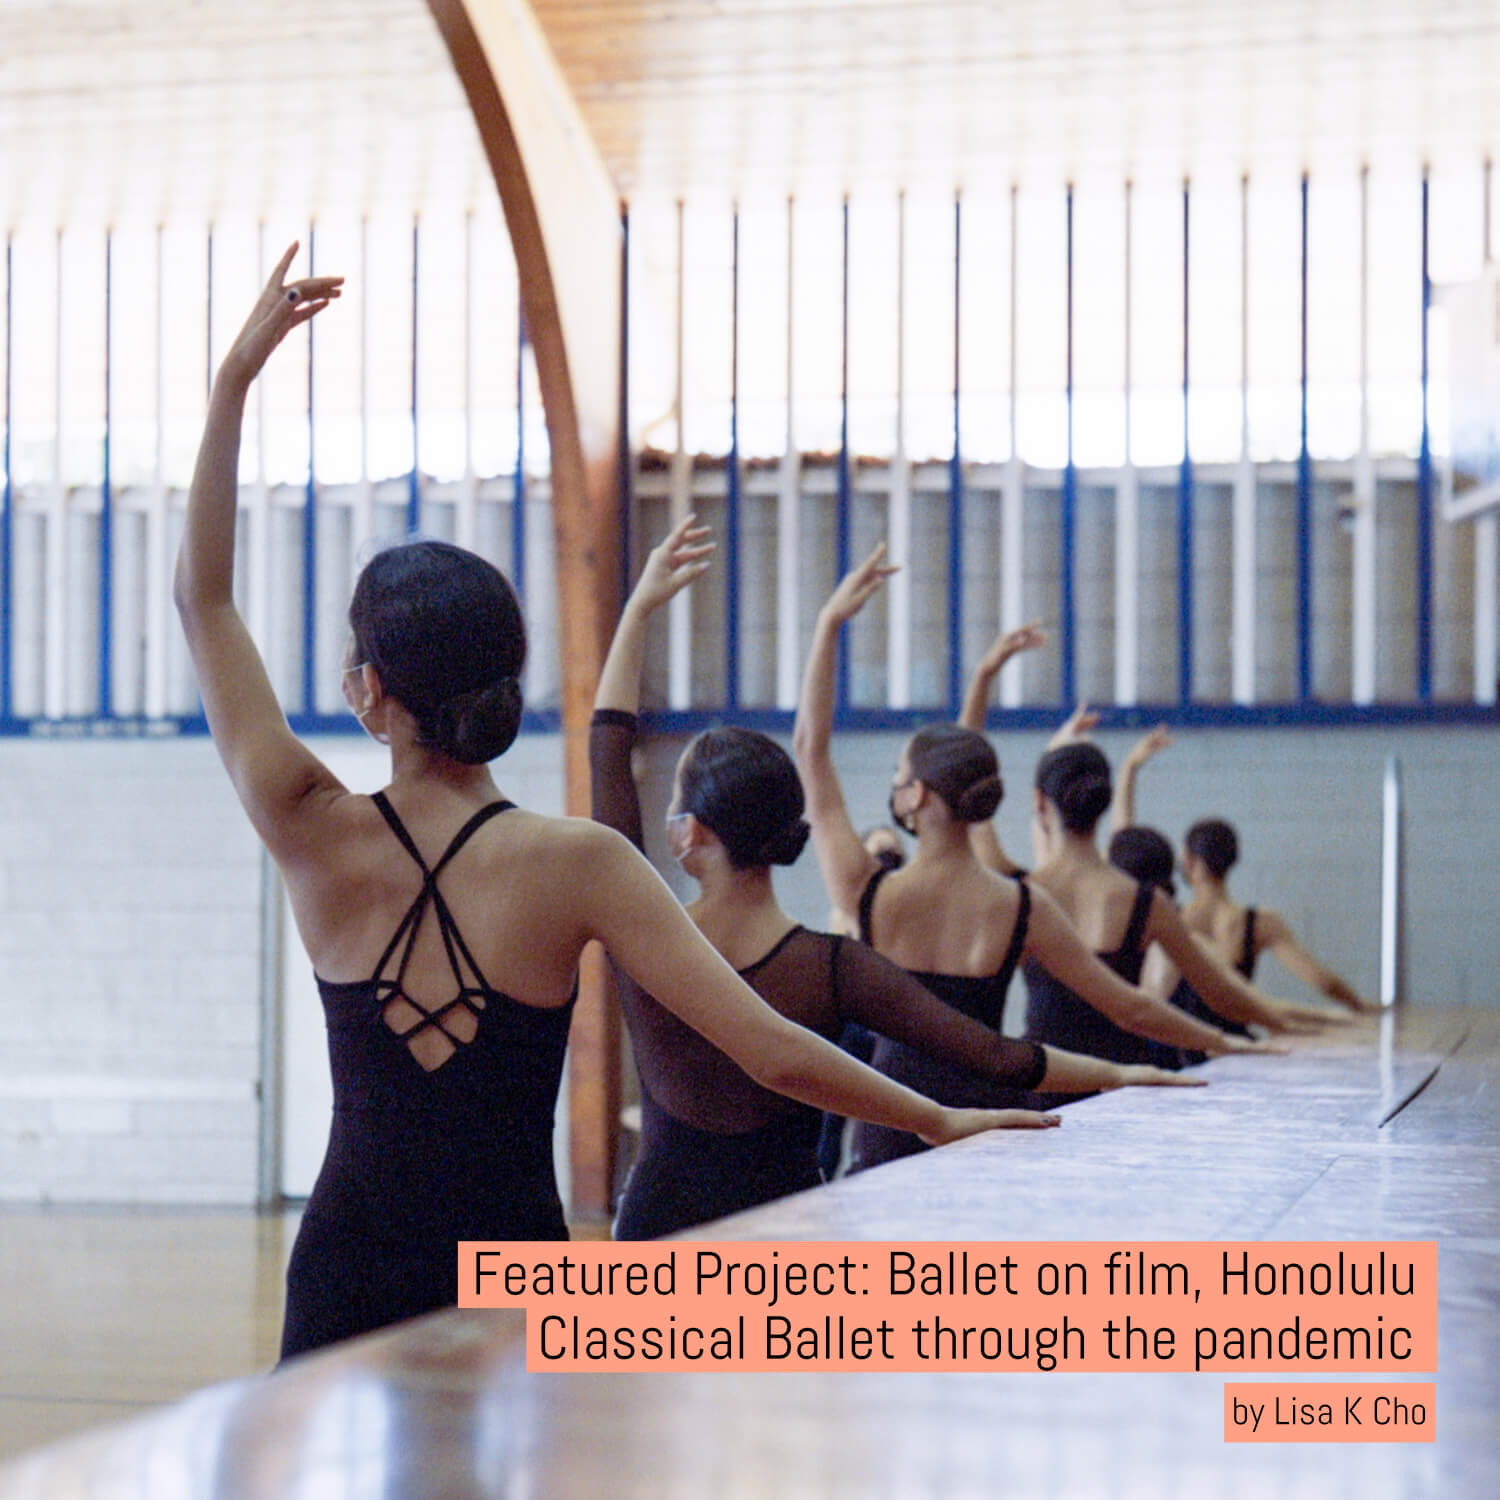 Featured Project: Ballet on film, Honolulu Classical Ballet through the pandemic